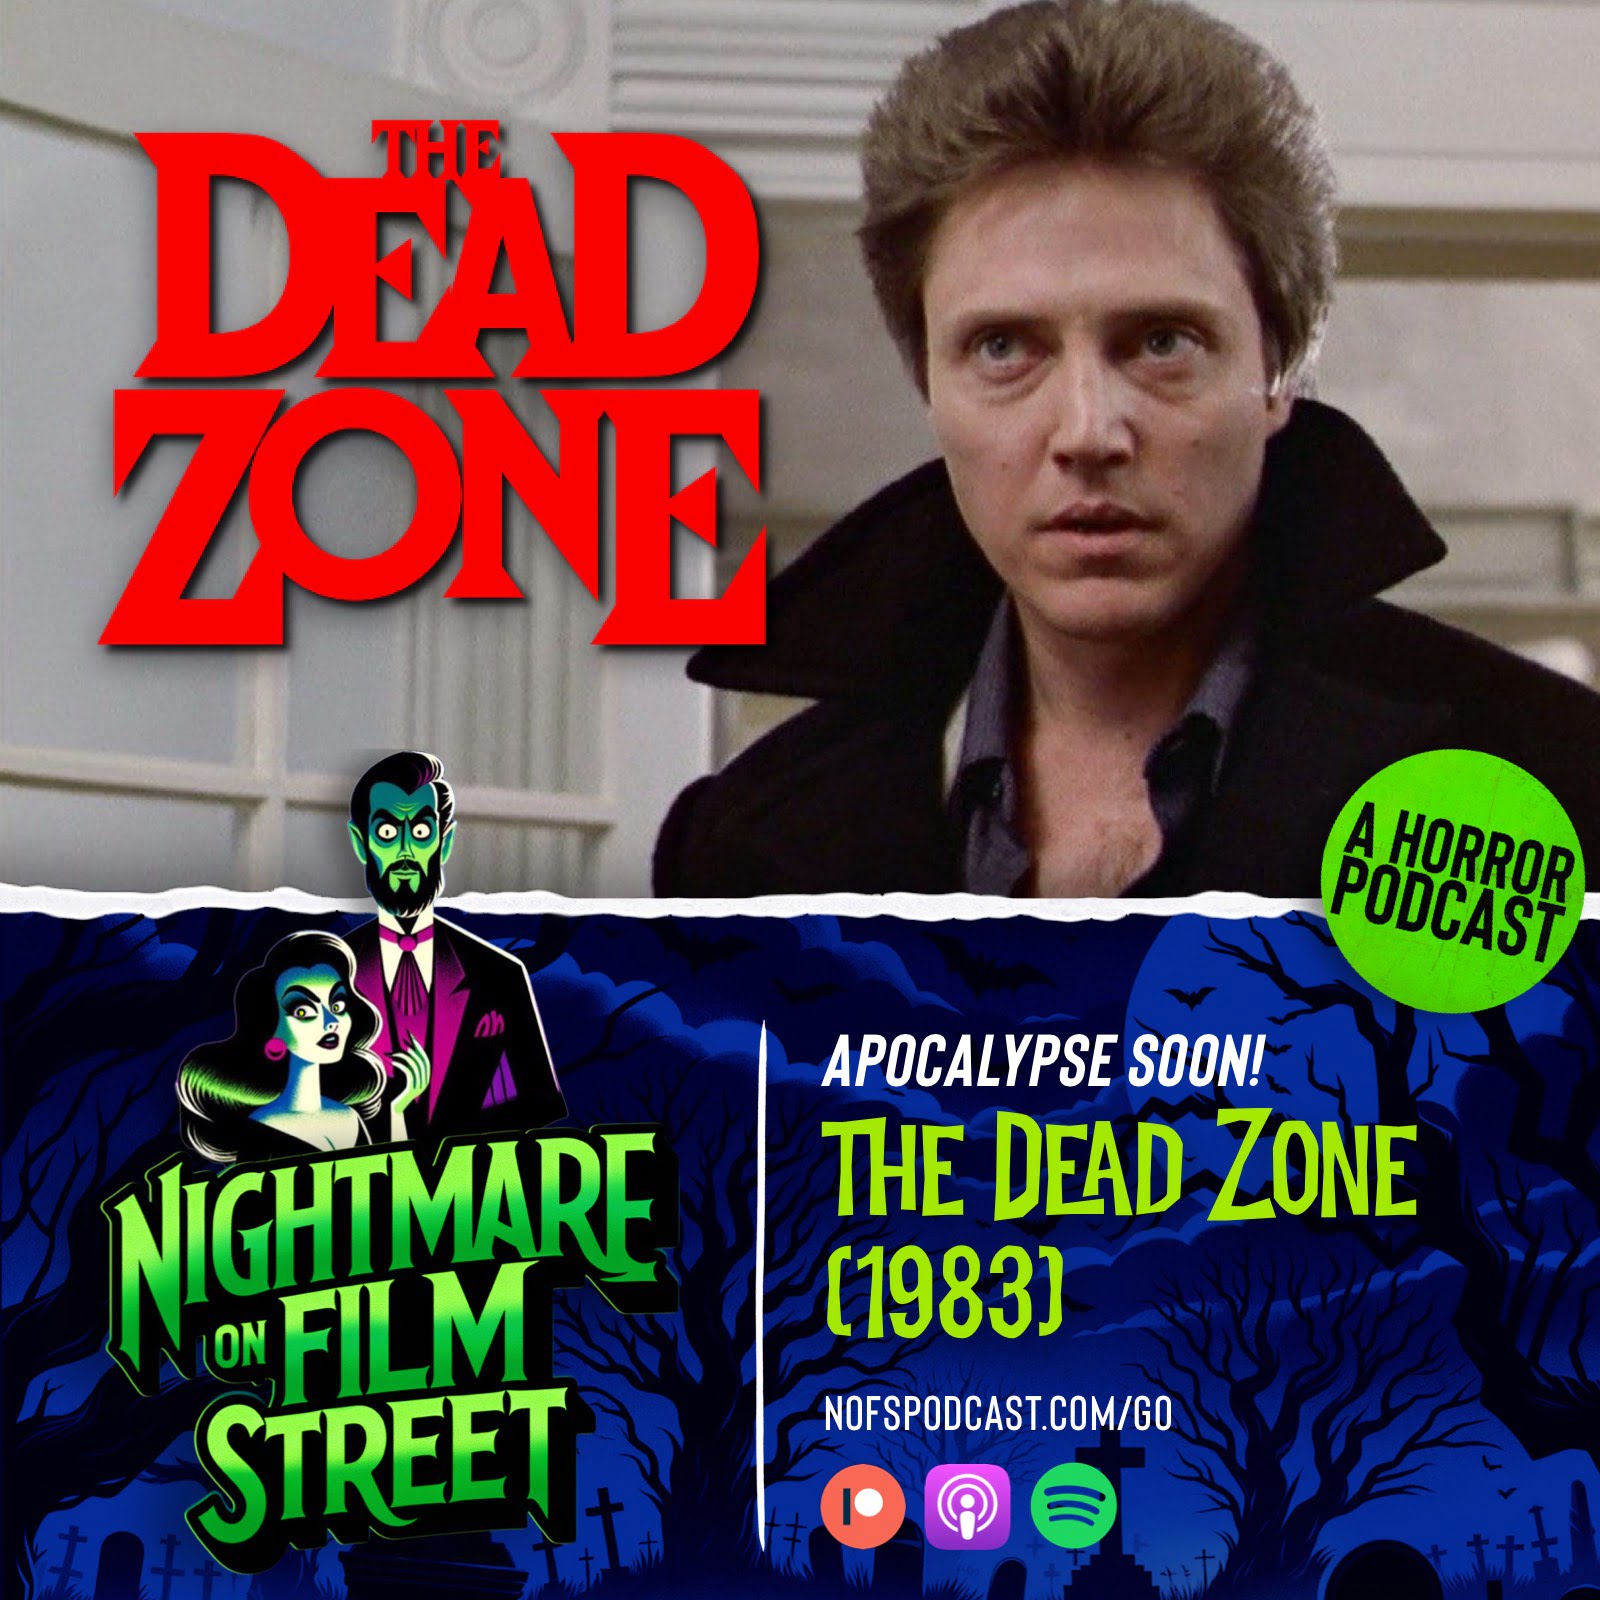 The Dead Zone 1983 - Nightmare on Film Street - the best horror movie Podcast